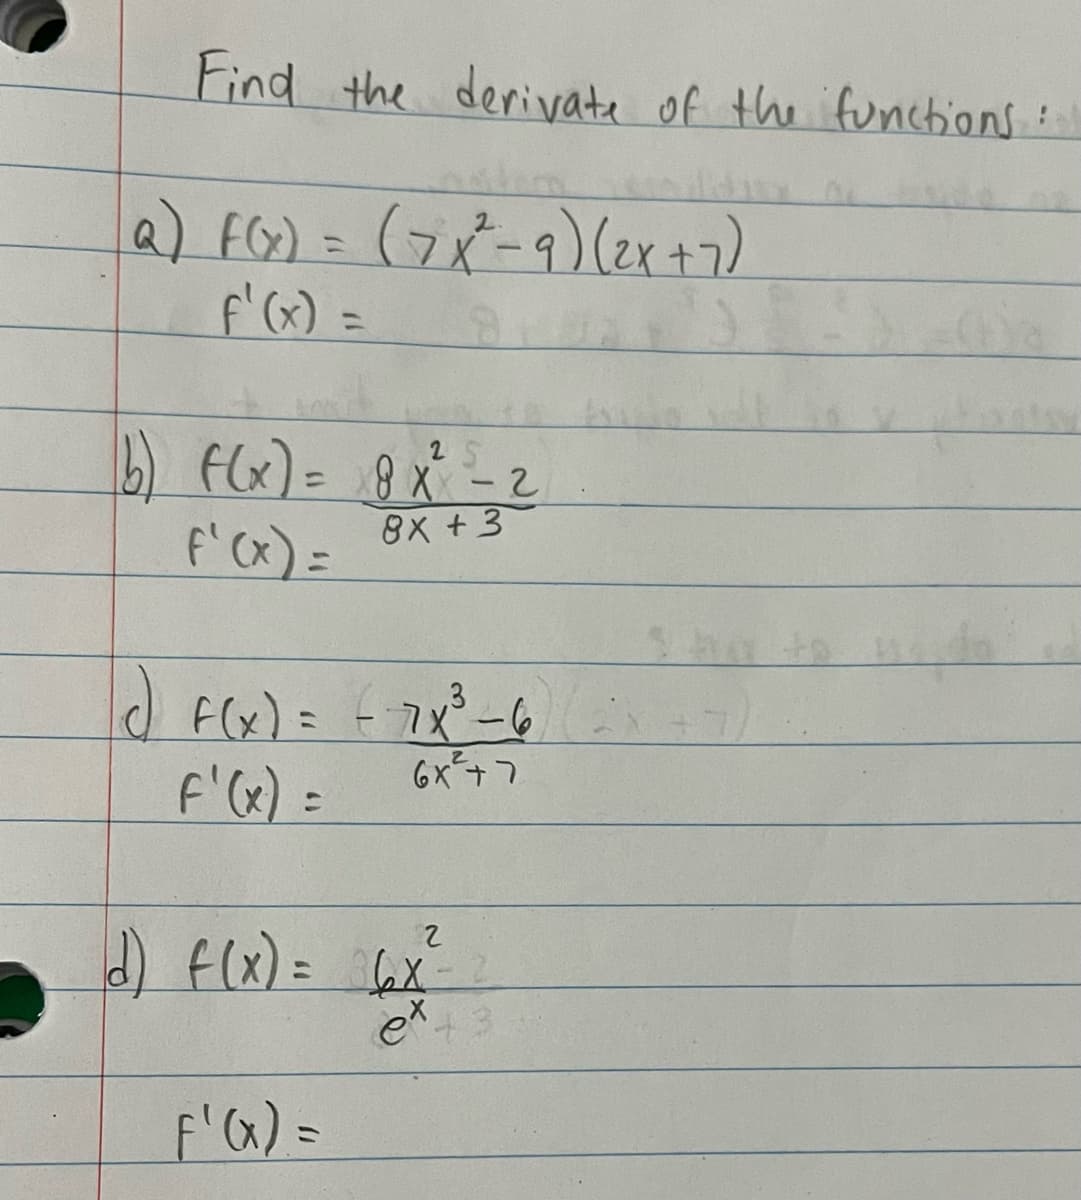 Find the derivate of the functions ::
(a) F(x) = (7x²-9) (2x + 7)
f'(x) =
(b) f(x) = 8 x² - 2
f'(x) =
8x +3
1) F(x) = (-7X ³²-6
3
6x²+7
F'(x) =
2
d) f(x) = 6x²
F'(x) =
ex +3